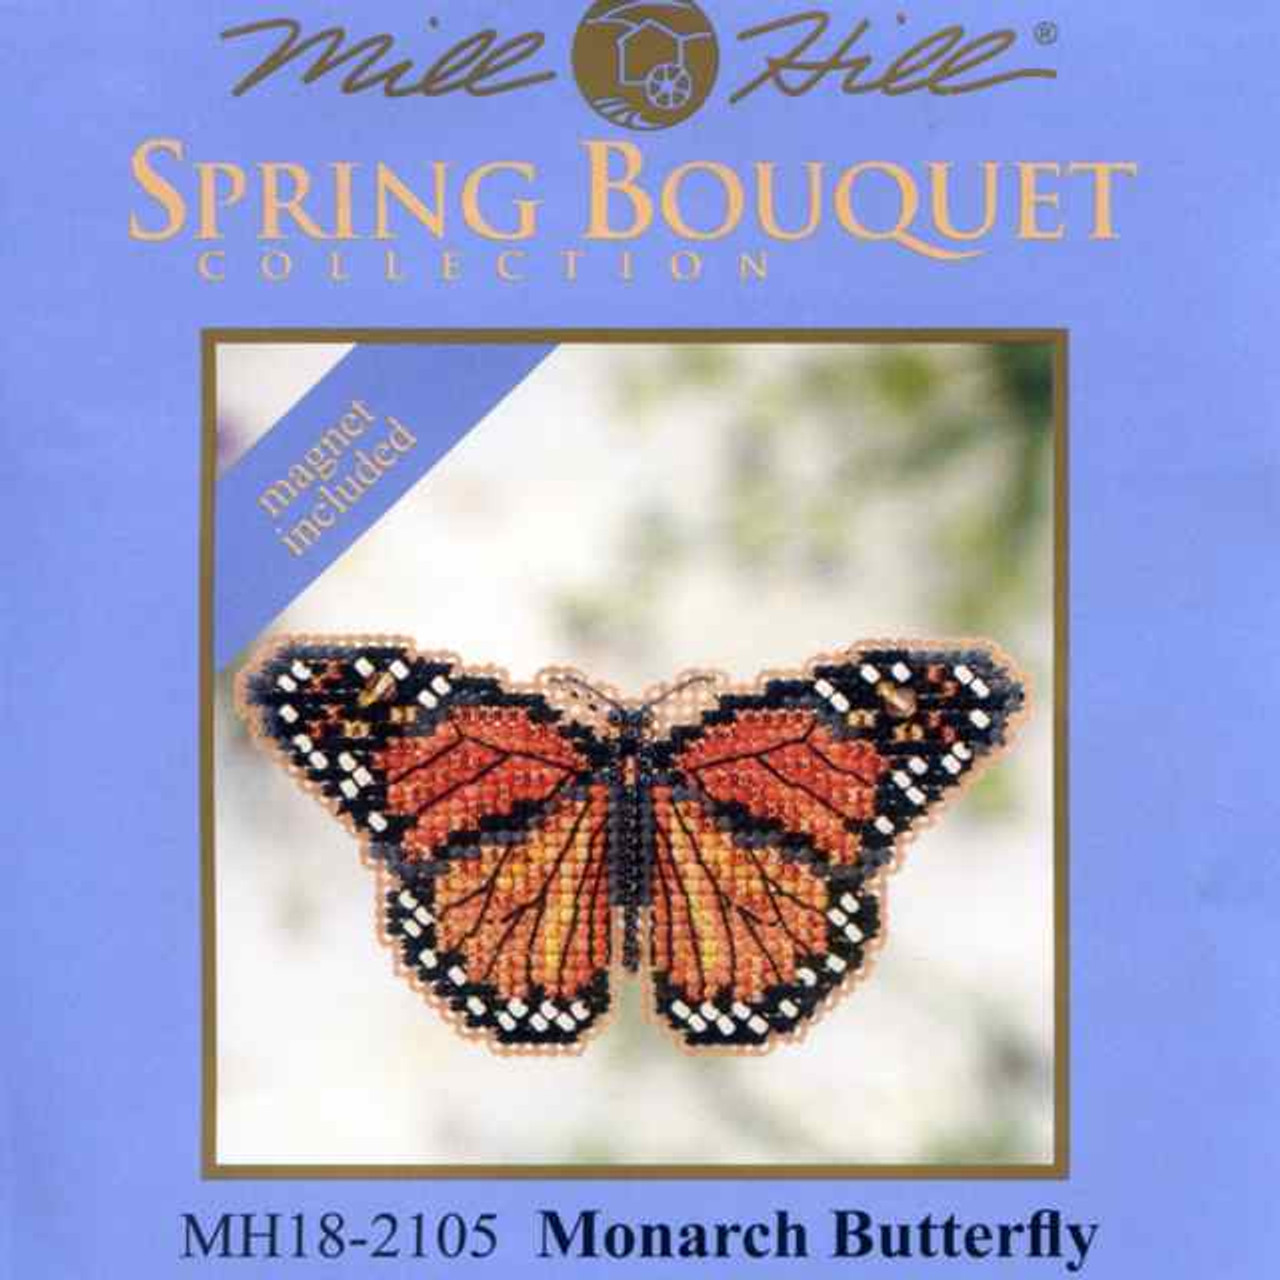 Package insert for Monarch Butterfly Bead Cross Stitch Kit Mill Hill 2012 Spring Bouquet